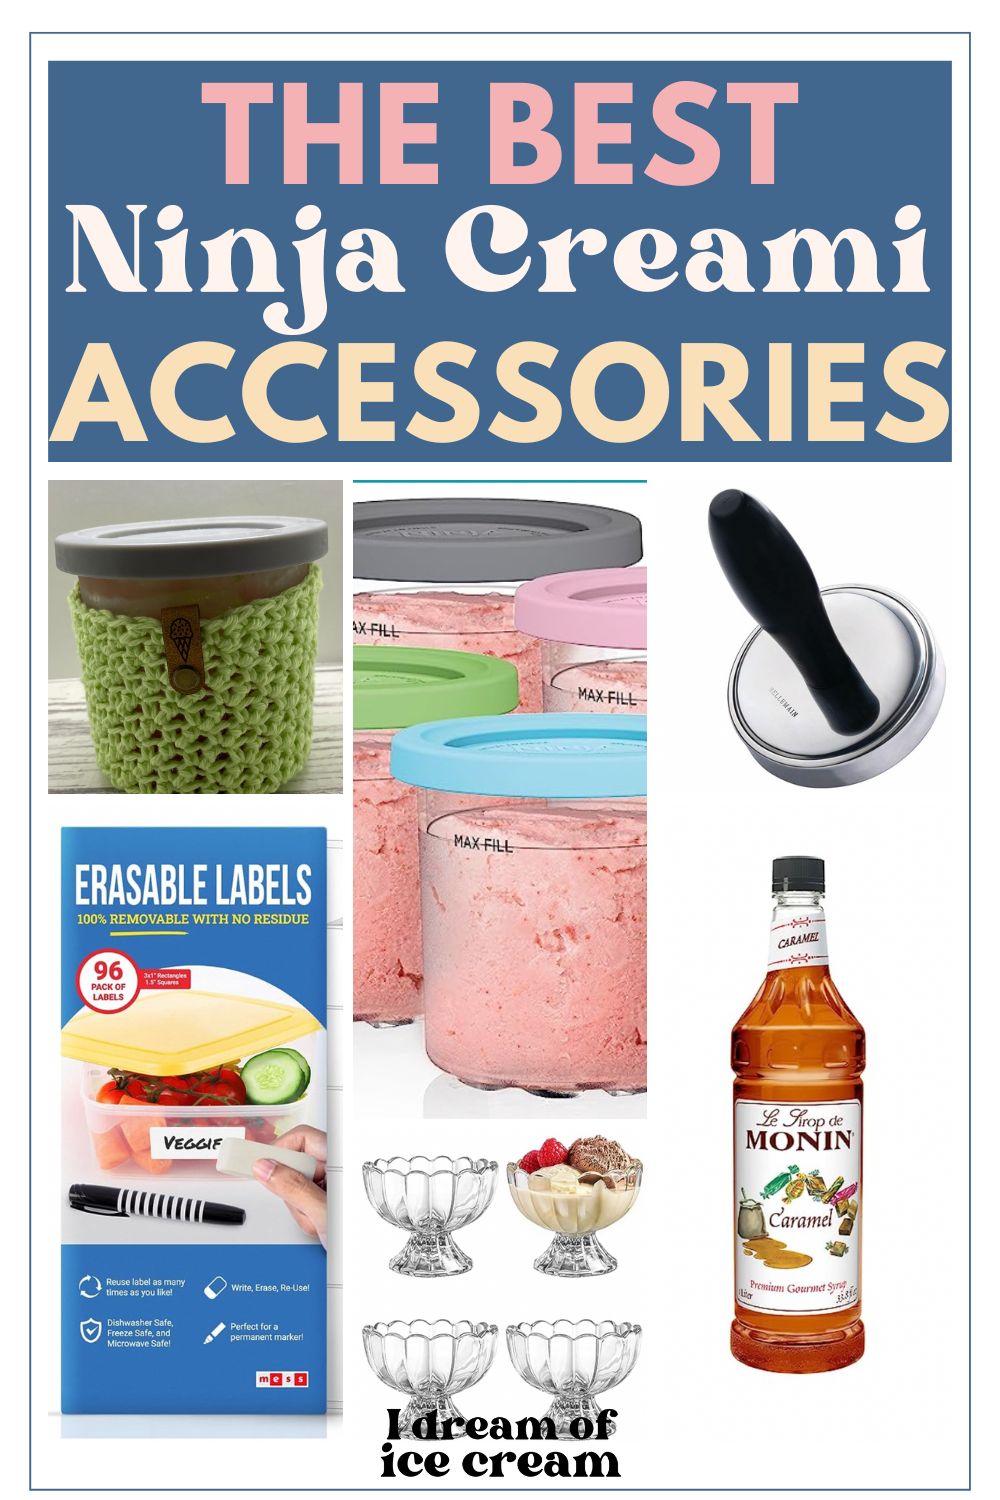 collage image featuring various Ninja Creami accessories